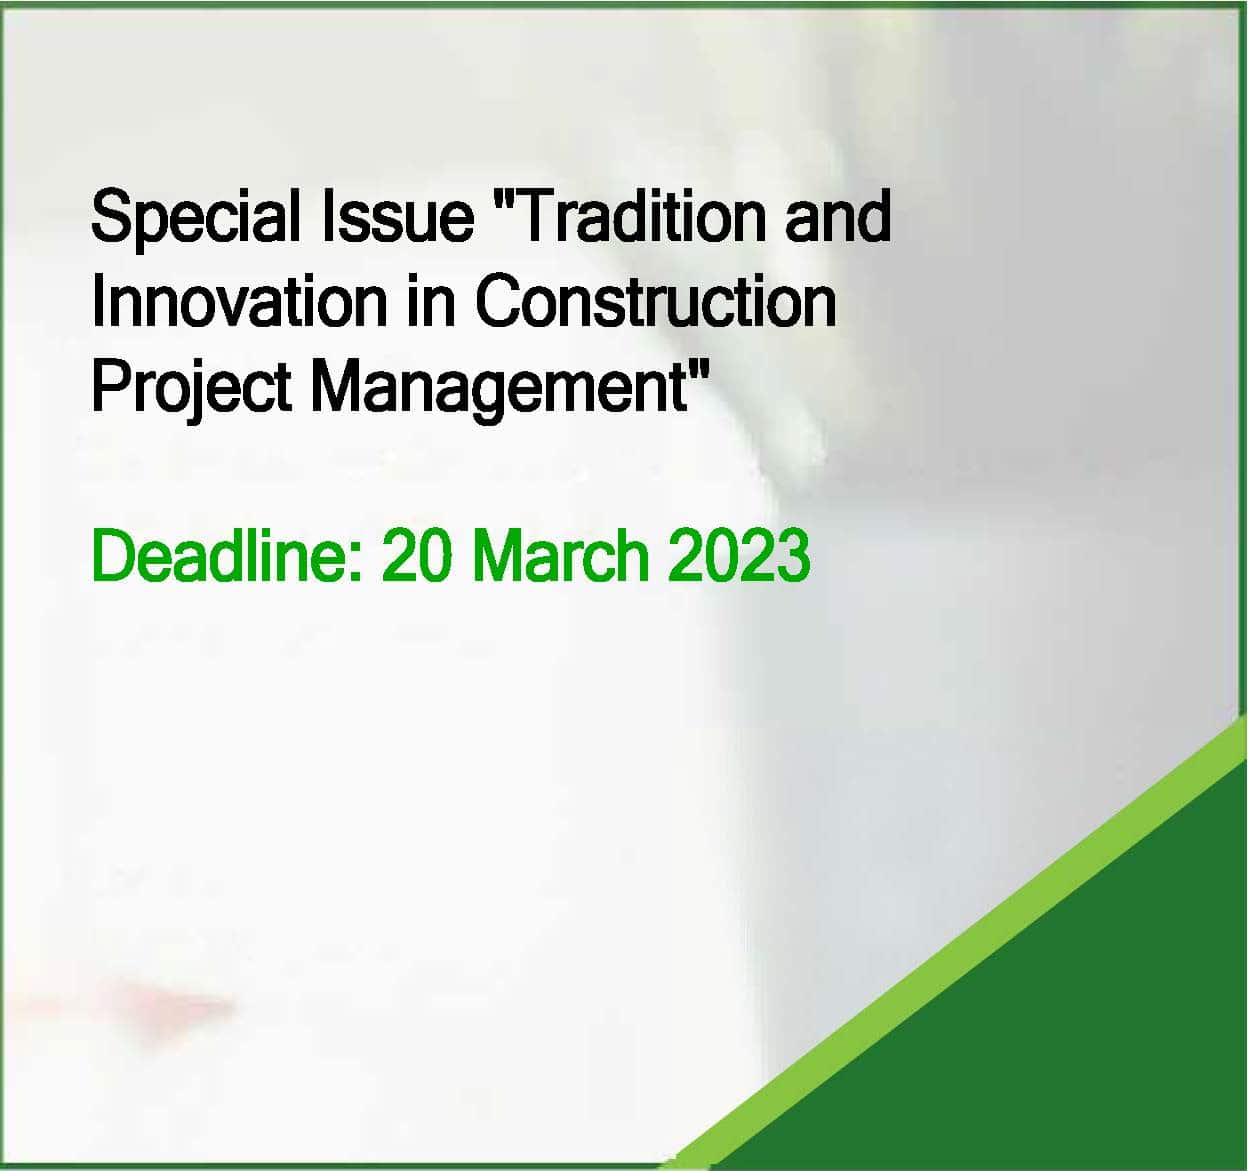 Special Issue “Tradition and Innovation in Construction Project Management”